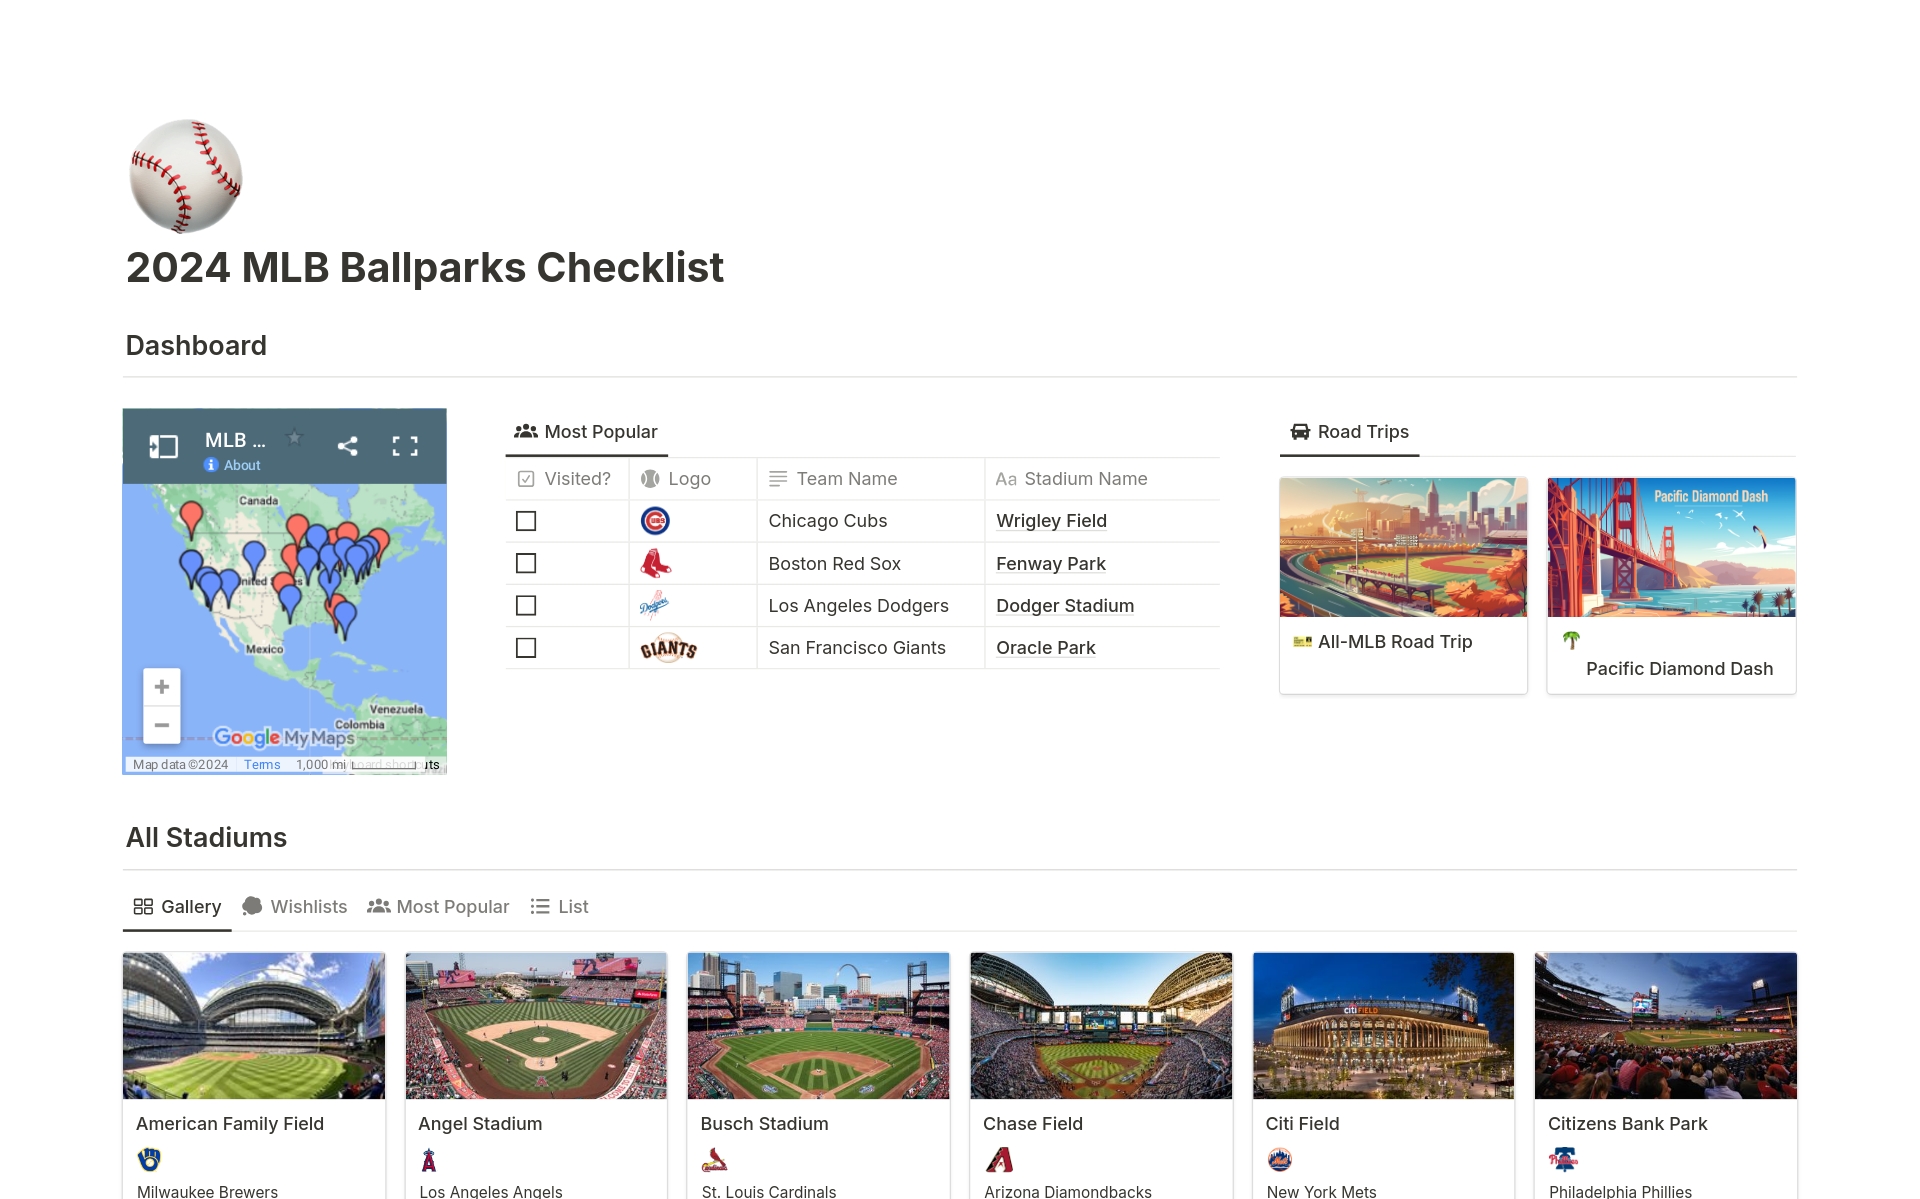 Kick off the 2024 season with this new Notion template! ⚾️ The 2024 MLB Ballpark Checklist tracks your progress, plans road trips, ranks friends' desires & shows stadiums on an interactive map. Be the ultimate baseball fan & get the 2024 MLB Ballpark Checklist today! 